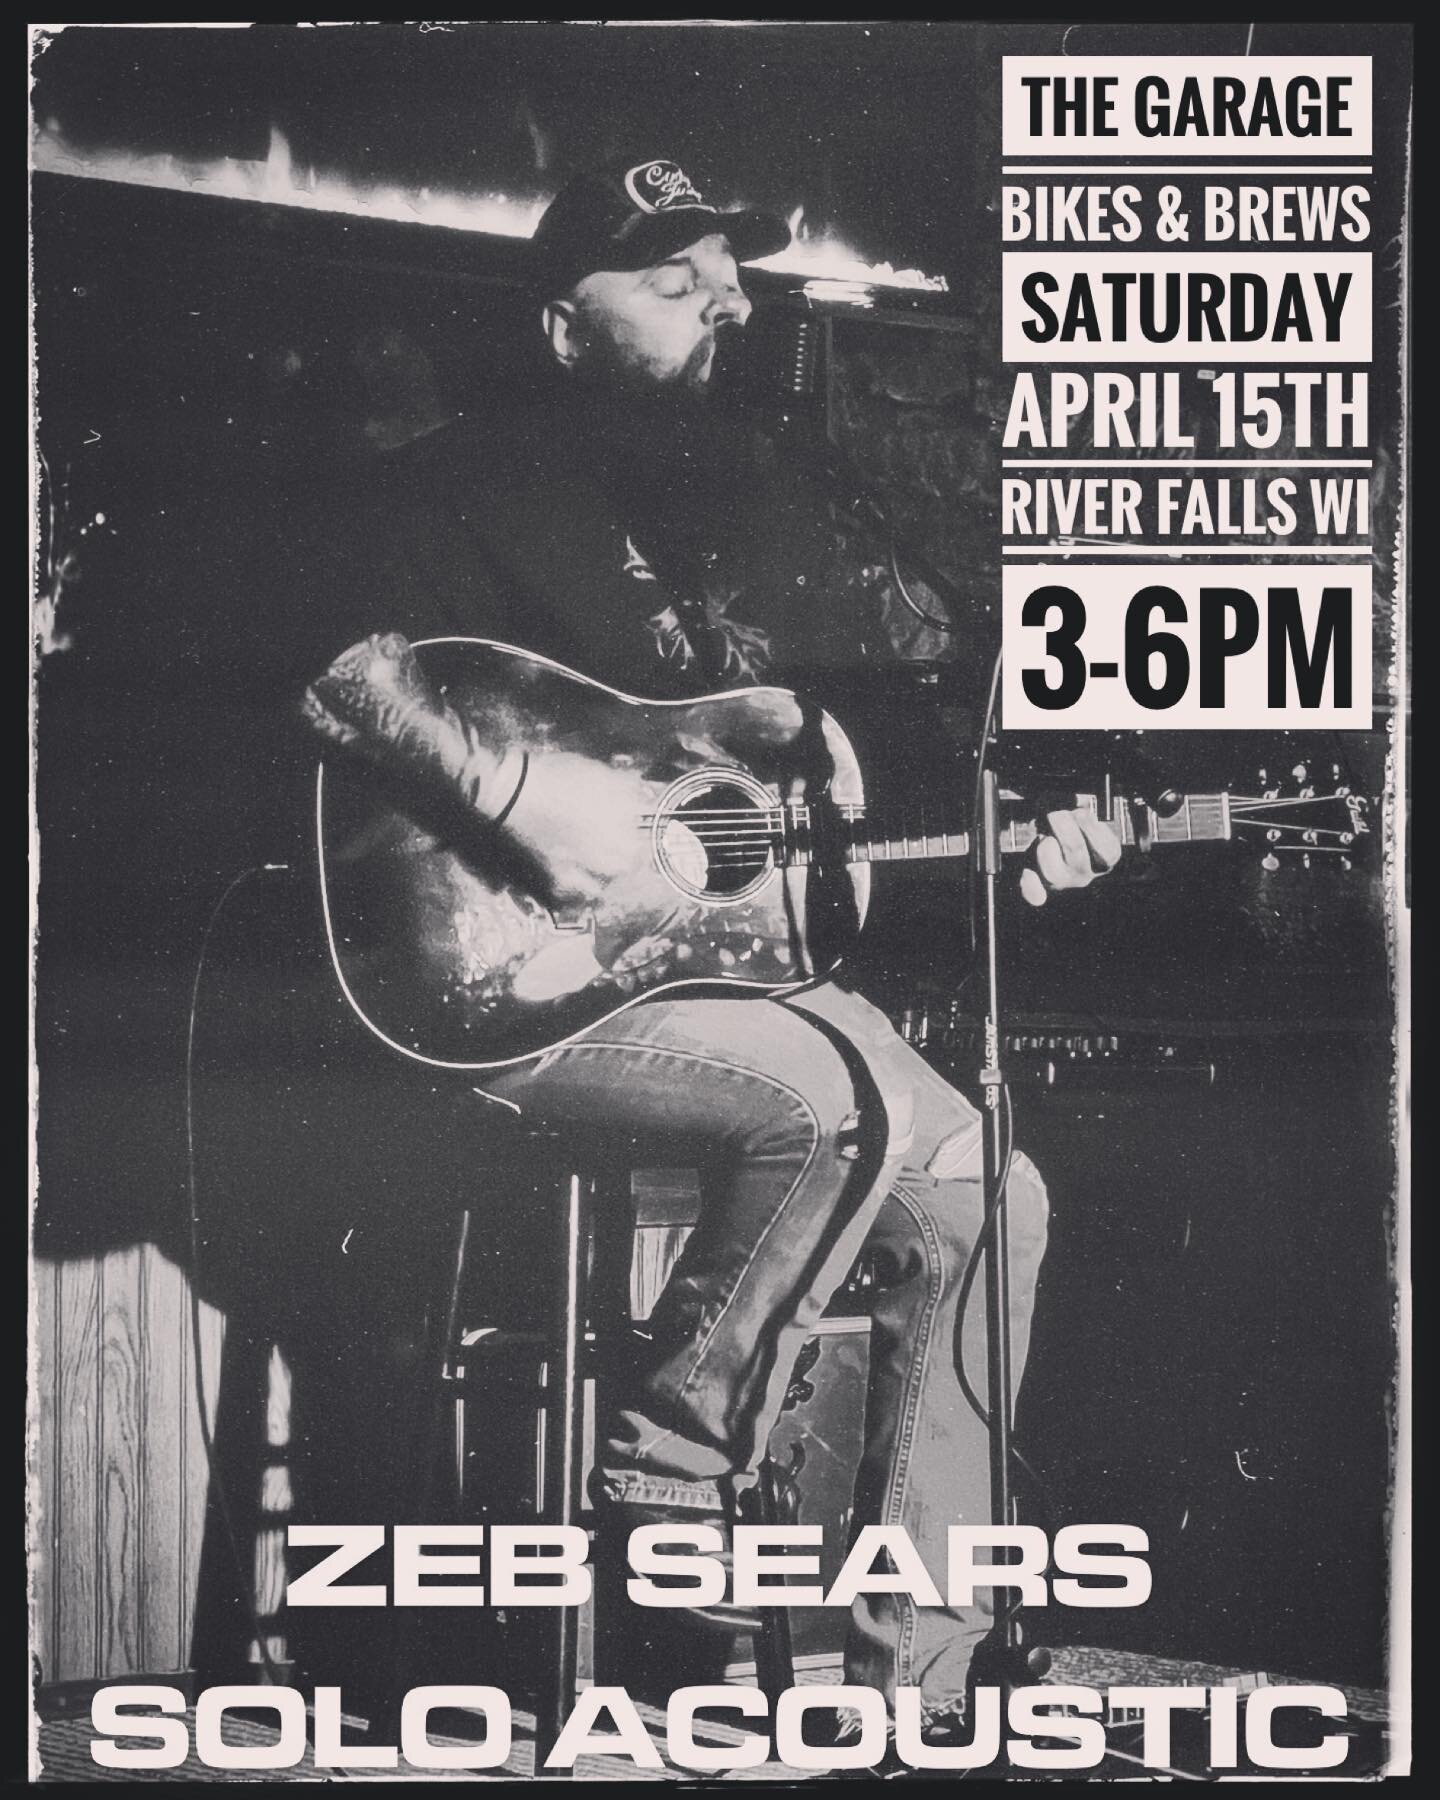 See y&rsquo;all Saturday afternoon!! zebsears.com